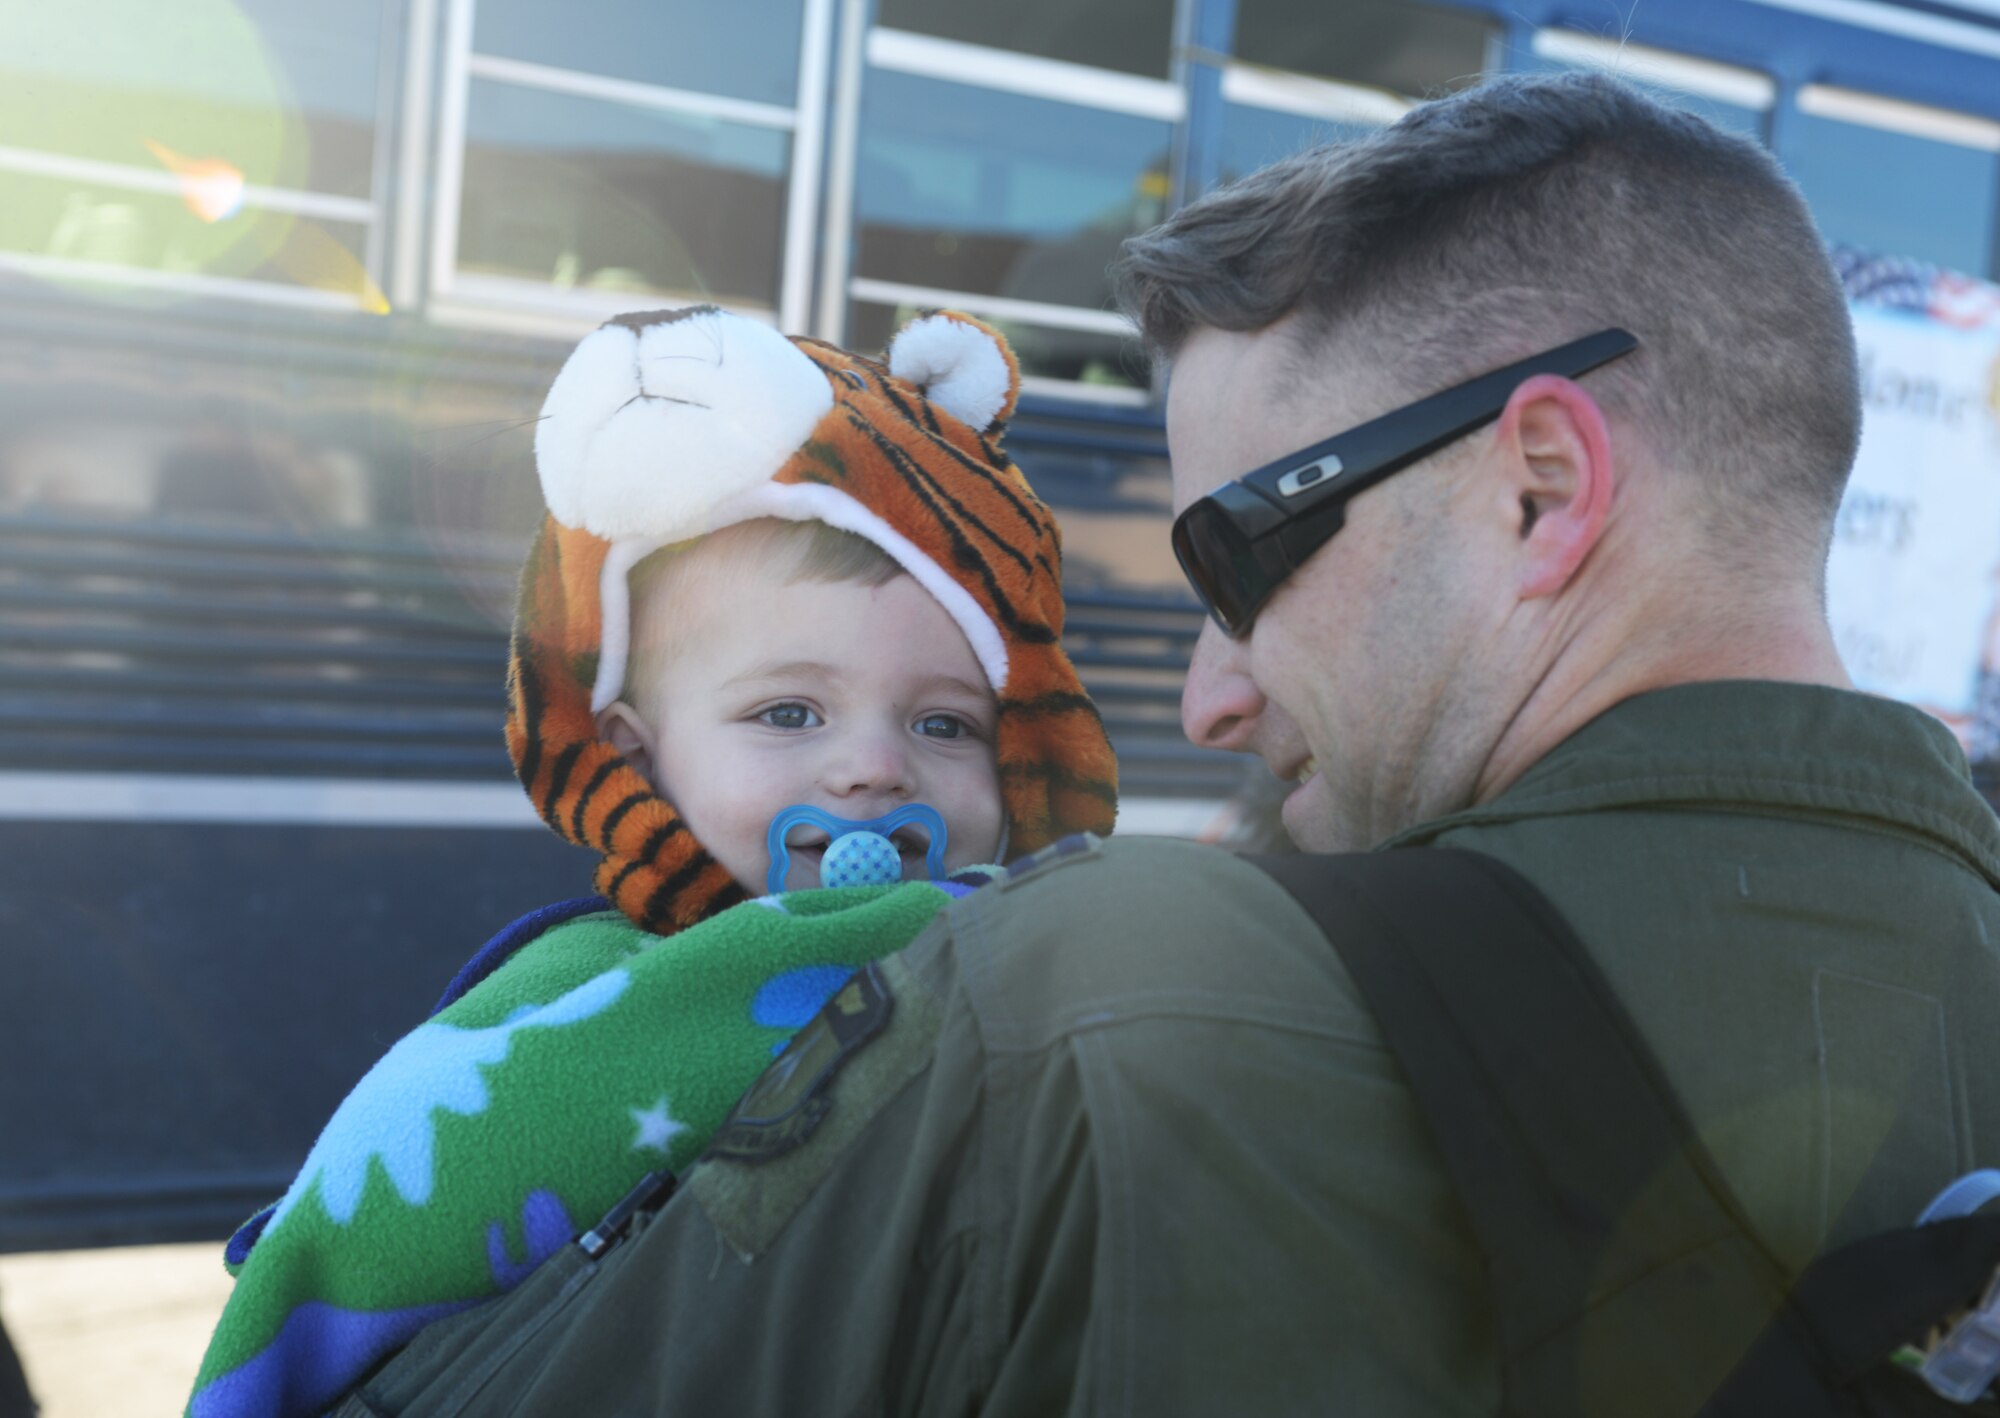 Capt. Chad, a weapons system officer assigned to the 37th Bomb Squadron, holds his son, Grant, at Ellsworth Air Force Base, S.D., Jan. 25, 2018, after returning from a six-month deployment. B-1 bomber aircrews conducted sorties close to South Korea’s northern border as part of the U.S. Pacific Command’s Continuous Bomber Presence mission. (U.S. Air Force photo by Airman 1st Class Thomas Karol)